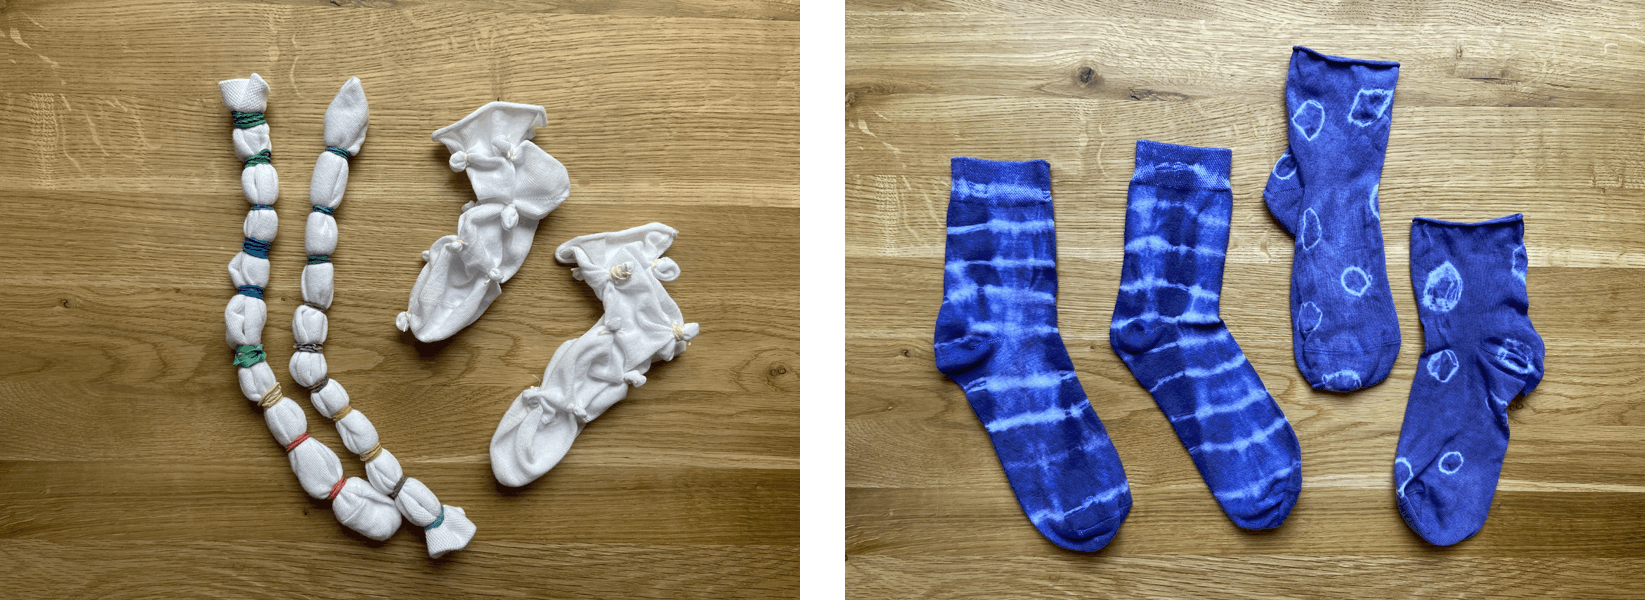  before and after photographs of socks dyed with Indigo dye